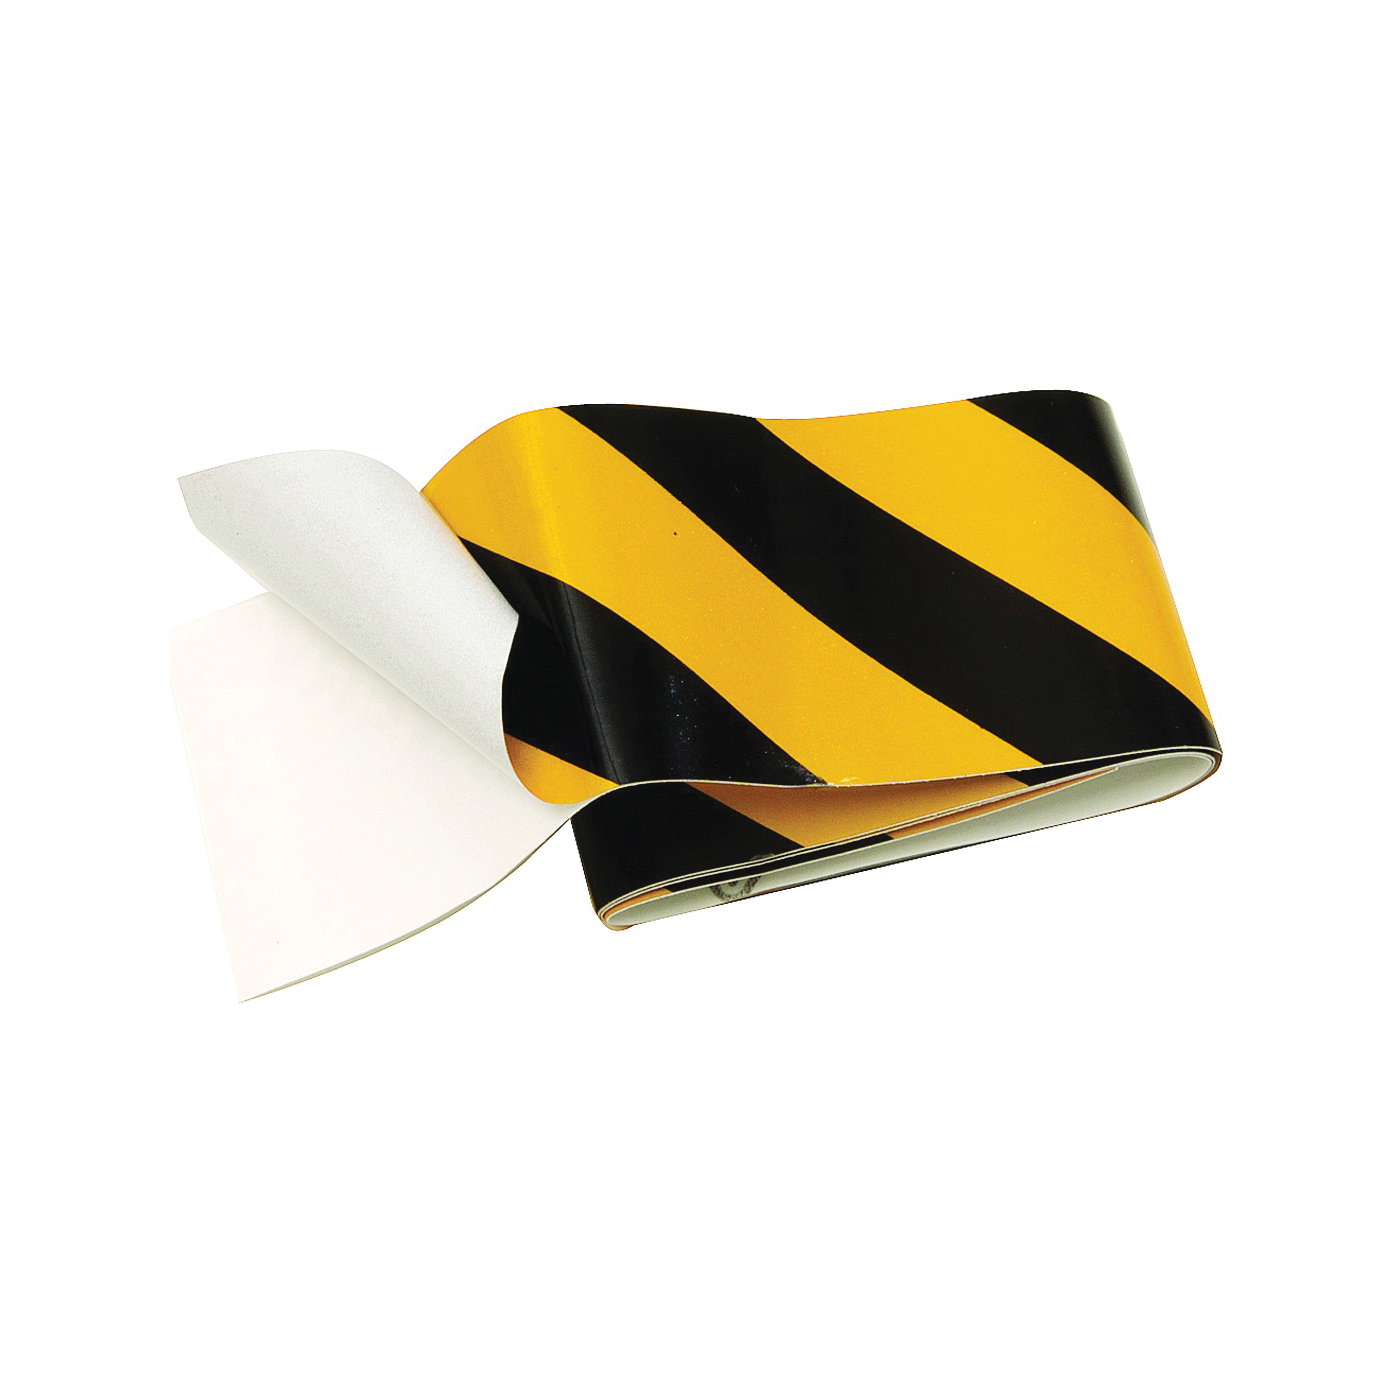 HY-KO TAPE-1 Reflective Safety Tape, 24 in L, 2 in W, Vinyl Backing, Black/Yellow - 1